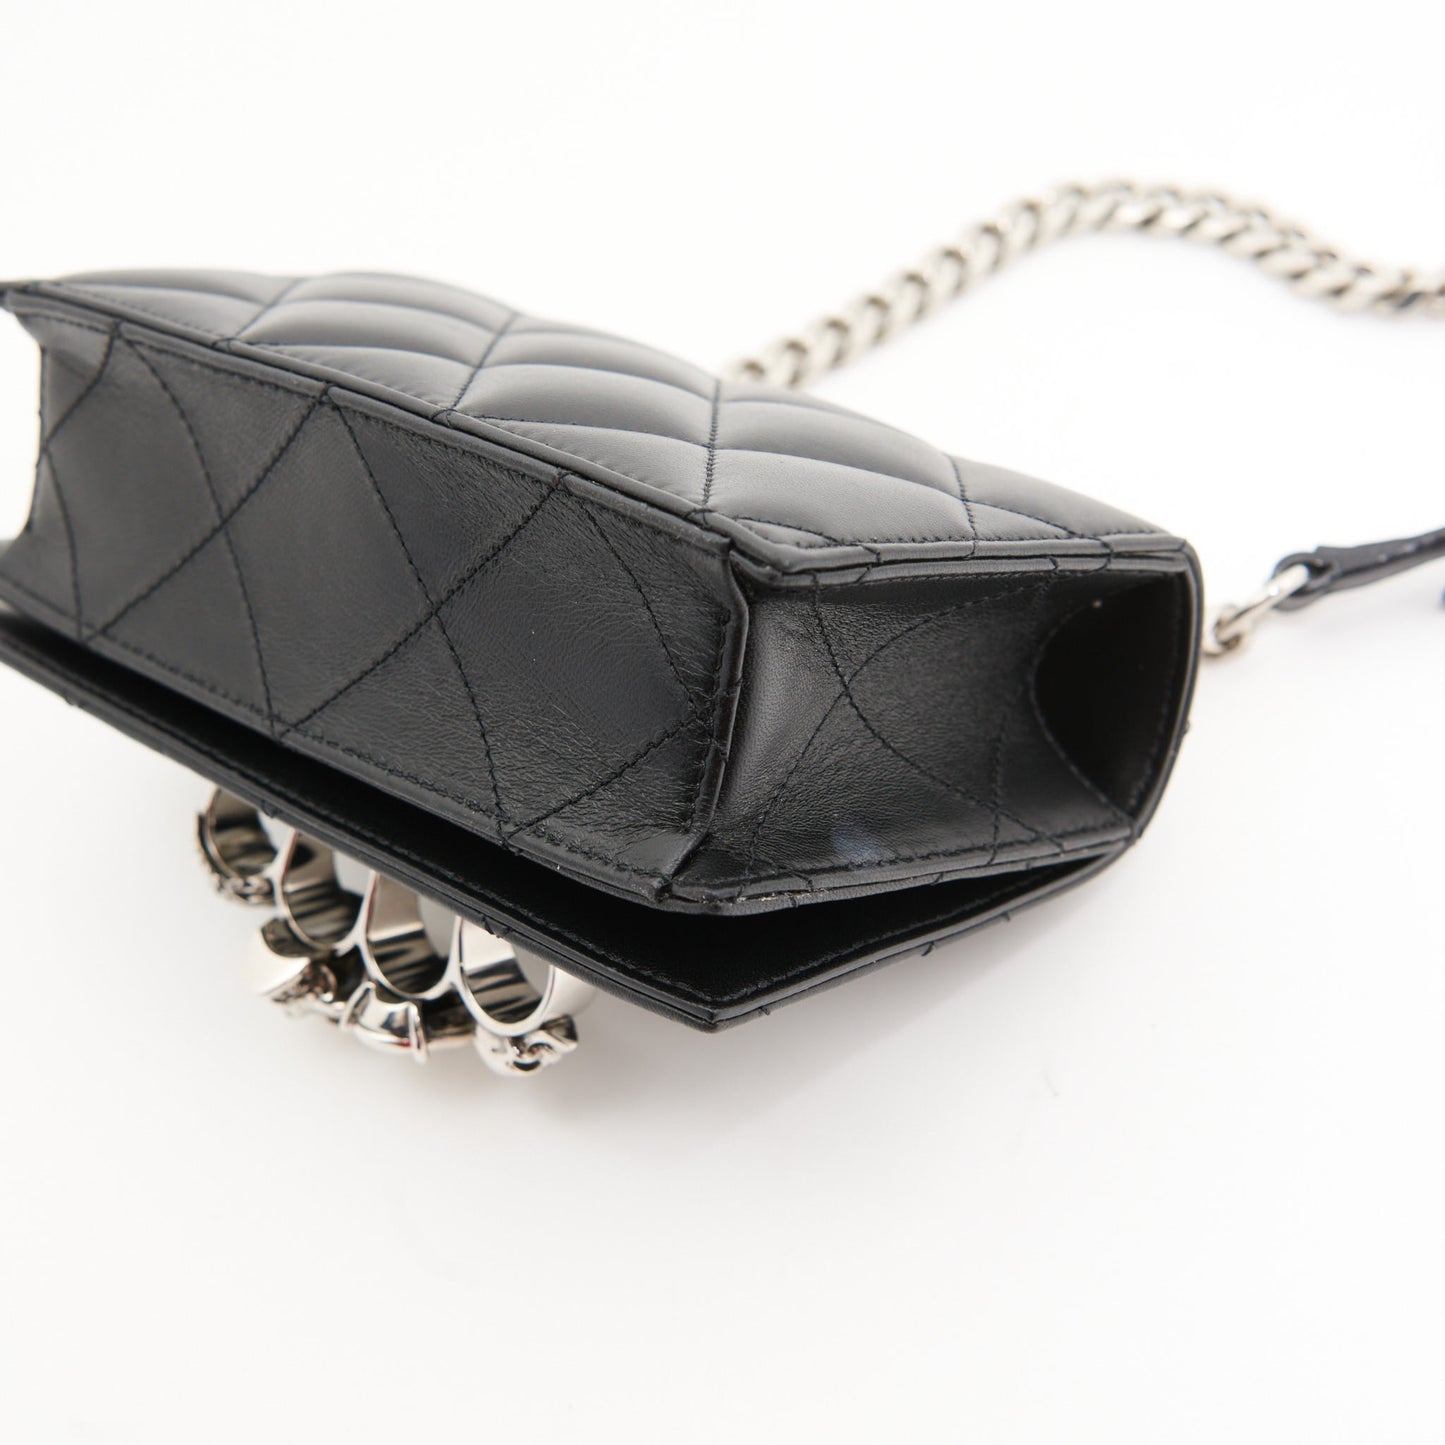 Alexander McQueen Calf Leather Jewelled The Knuckle Bag in Black